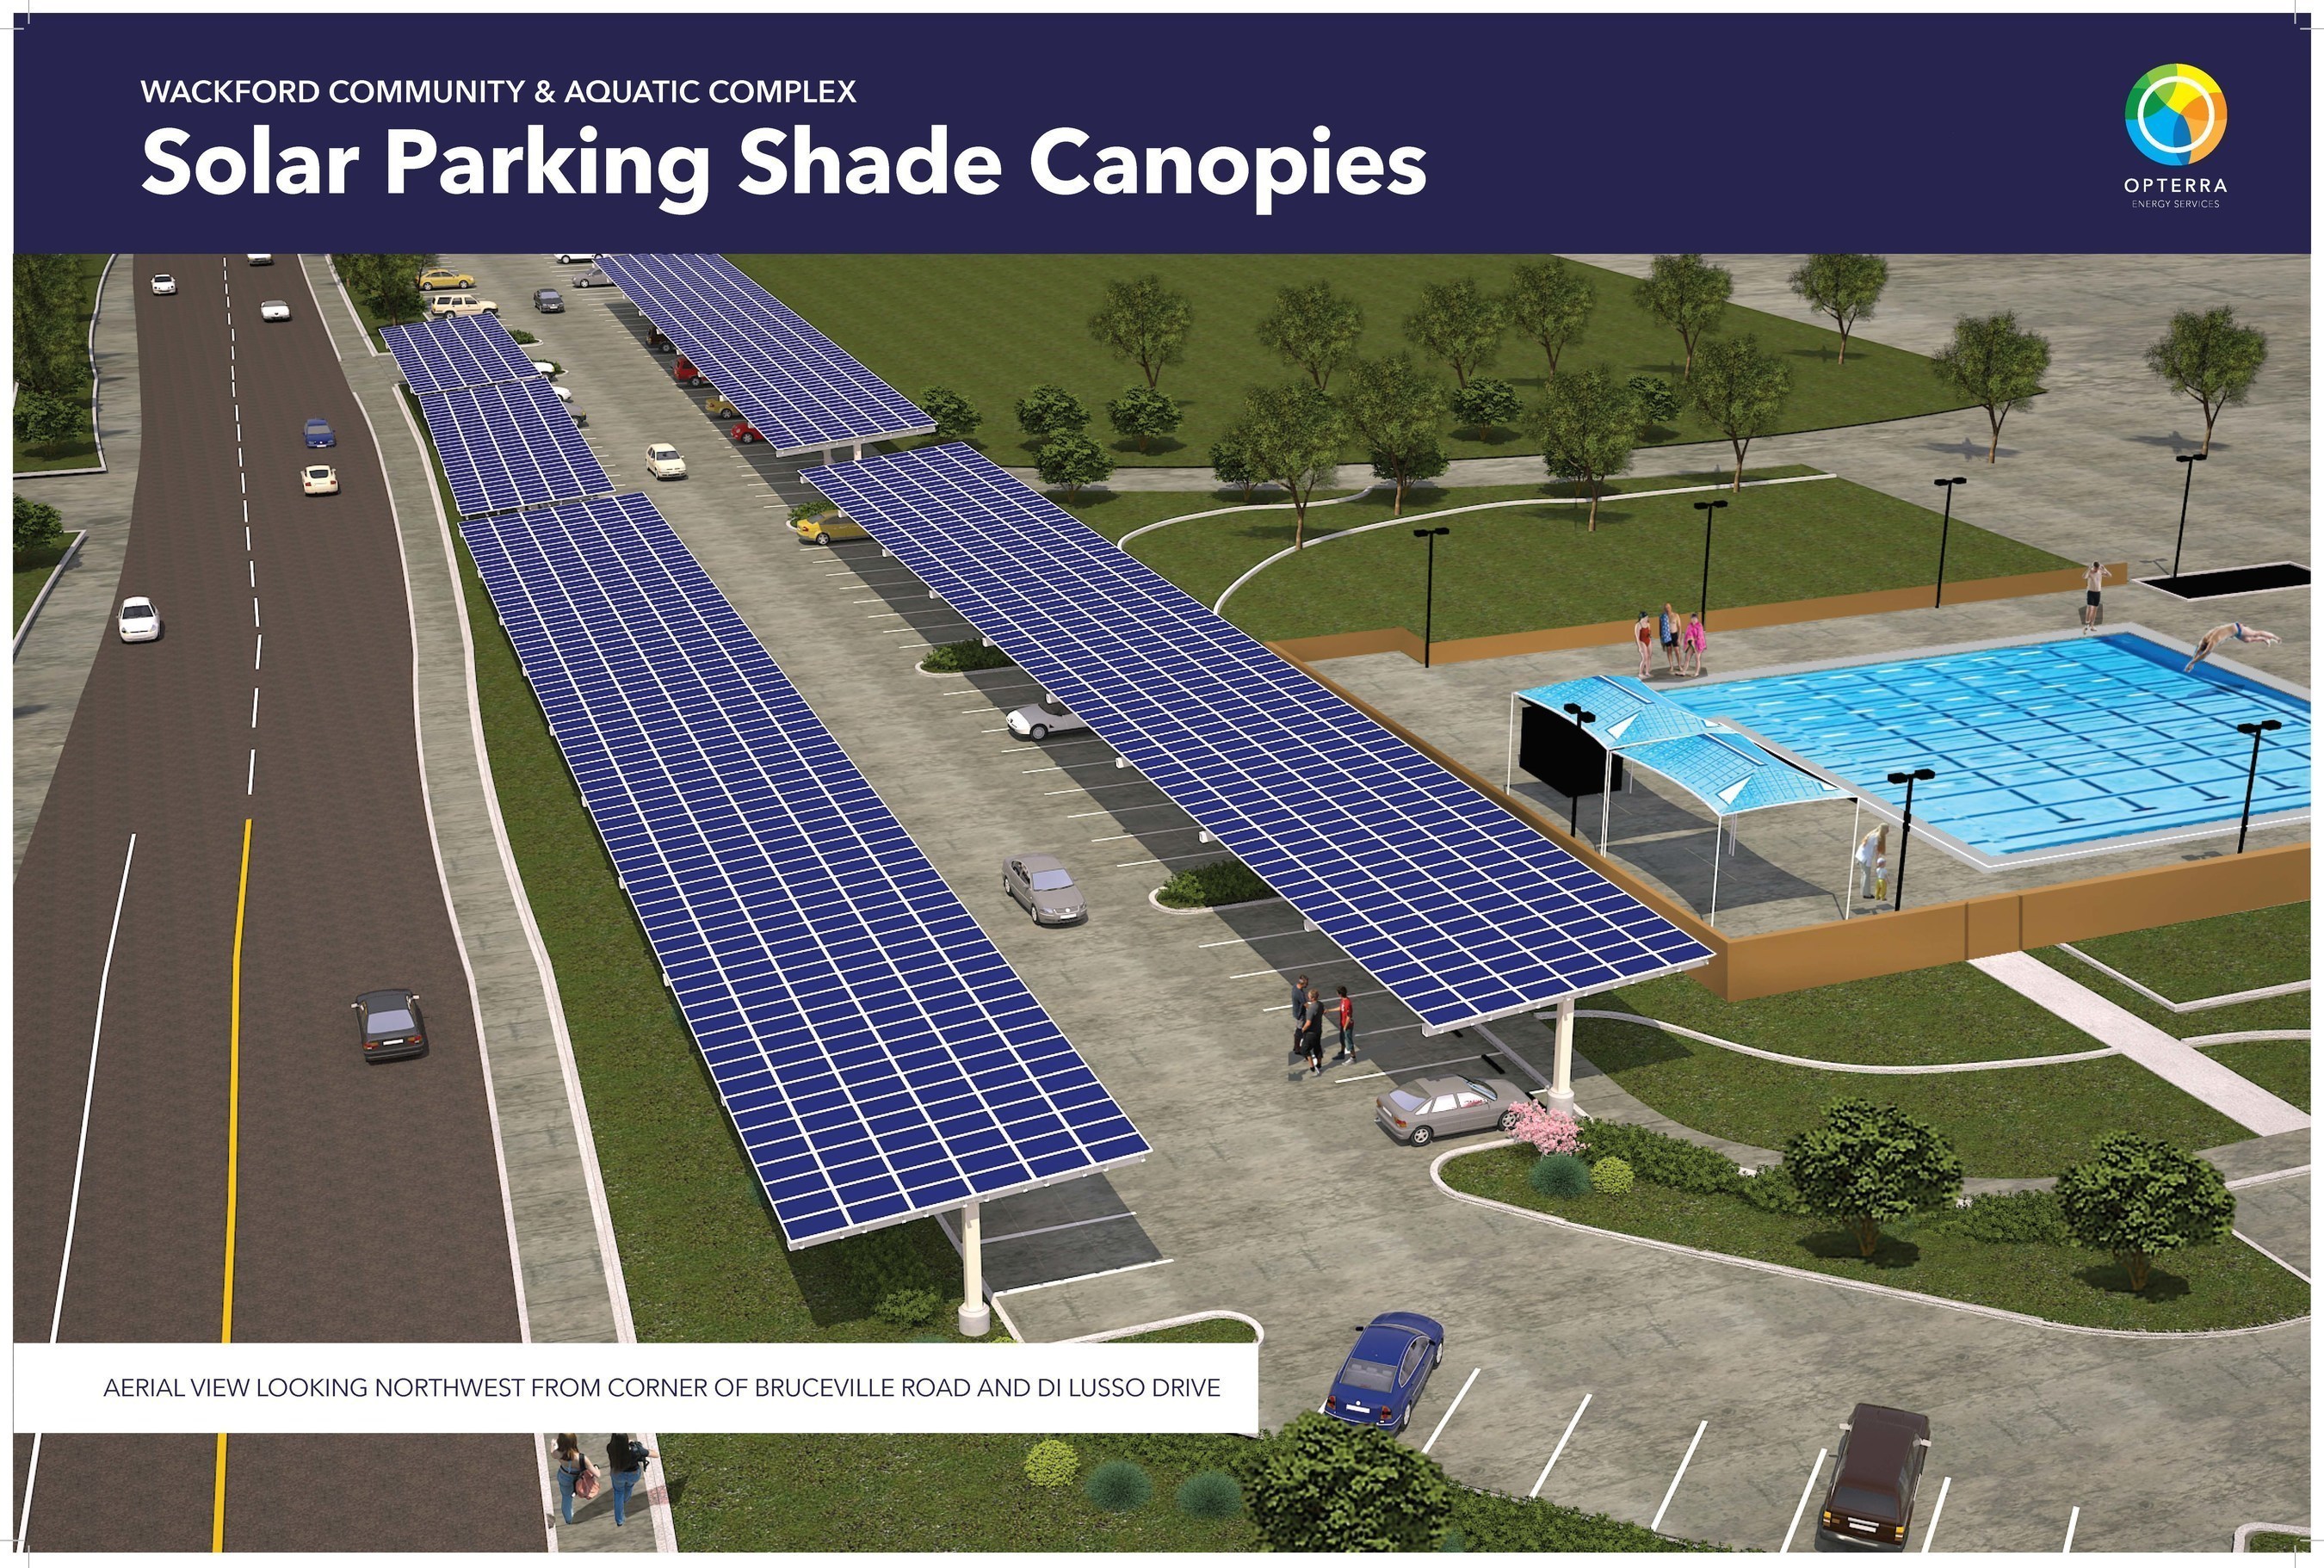 Rendering of one of the solar parking shade structures Cosumnes CSD will begin implementation on with OpTerra in fall 2016.